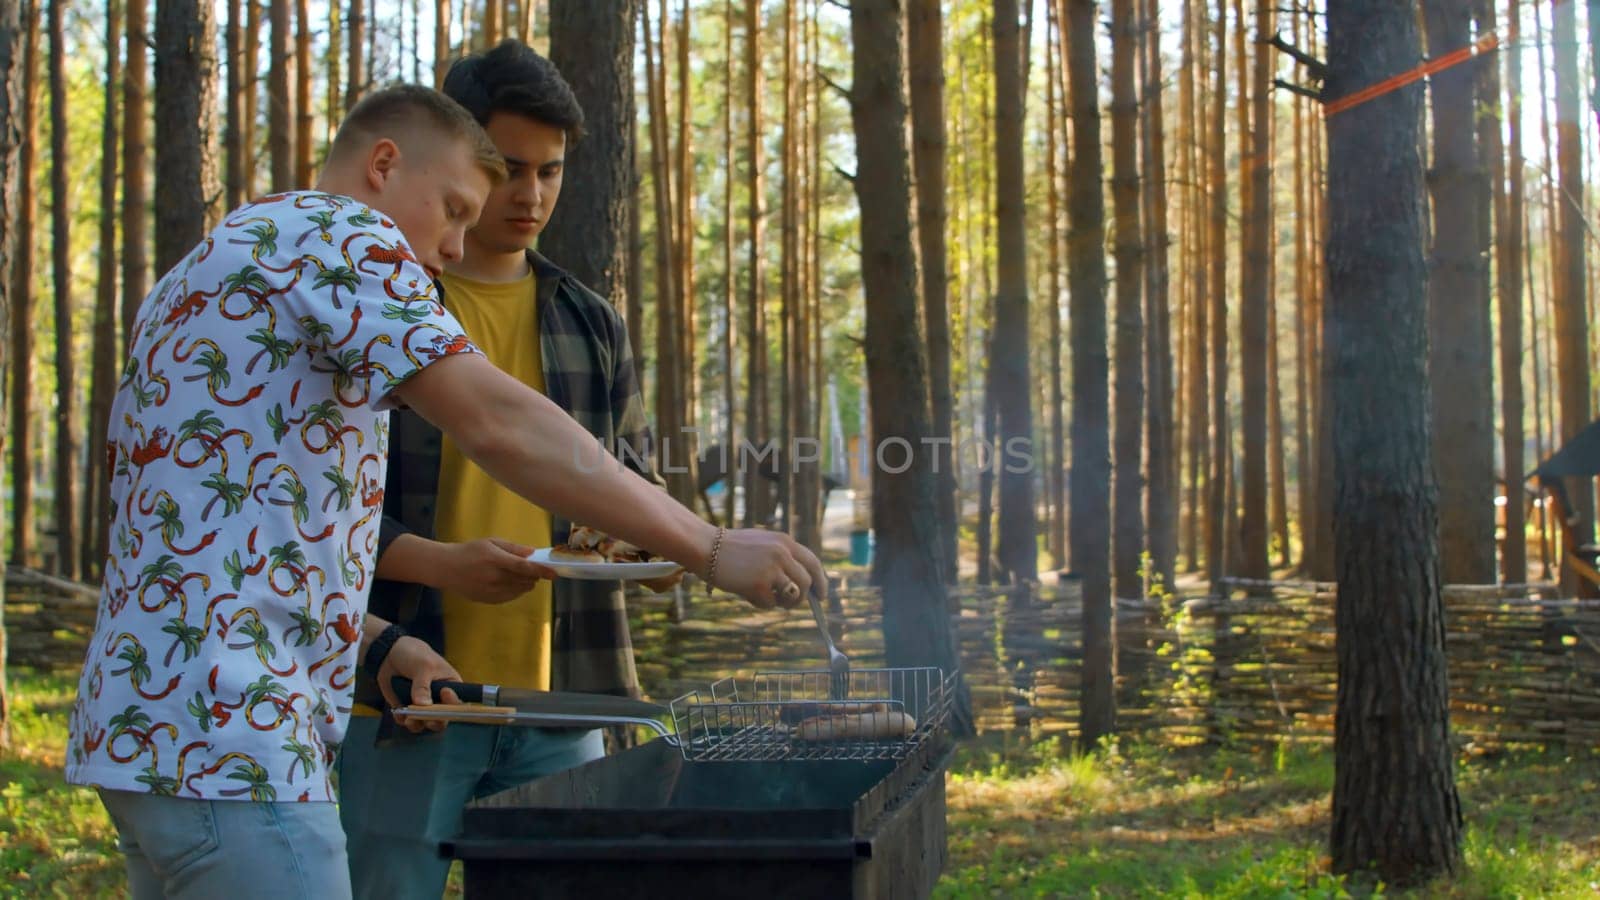 Men put barbecue on plate in nature. Stock footage. Men cooked sausages on grill in forest on sunny summer day. Men put barbecue meat on plate in nature by Mediawhalestock